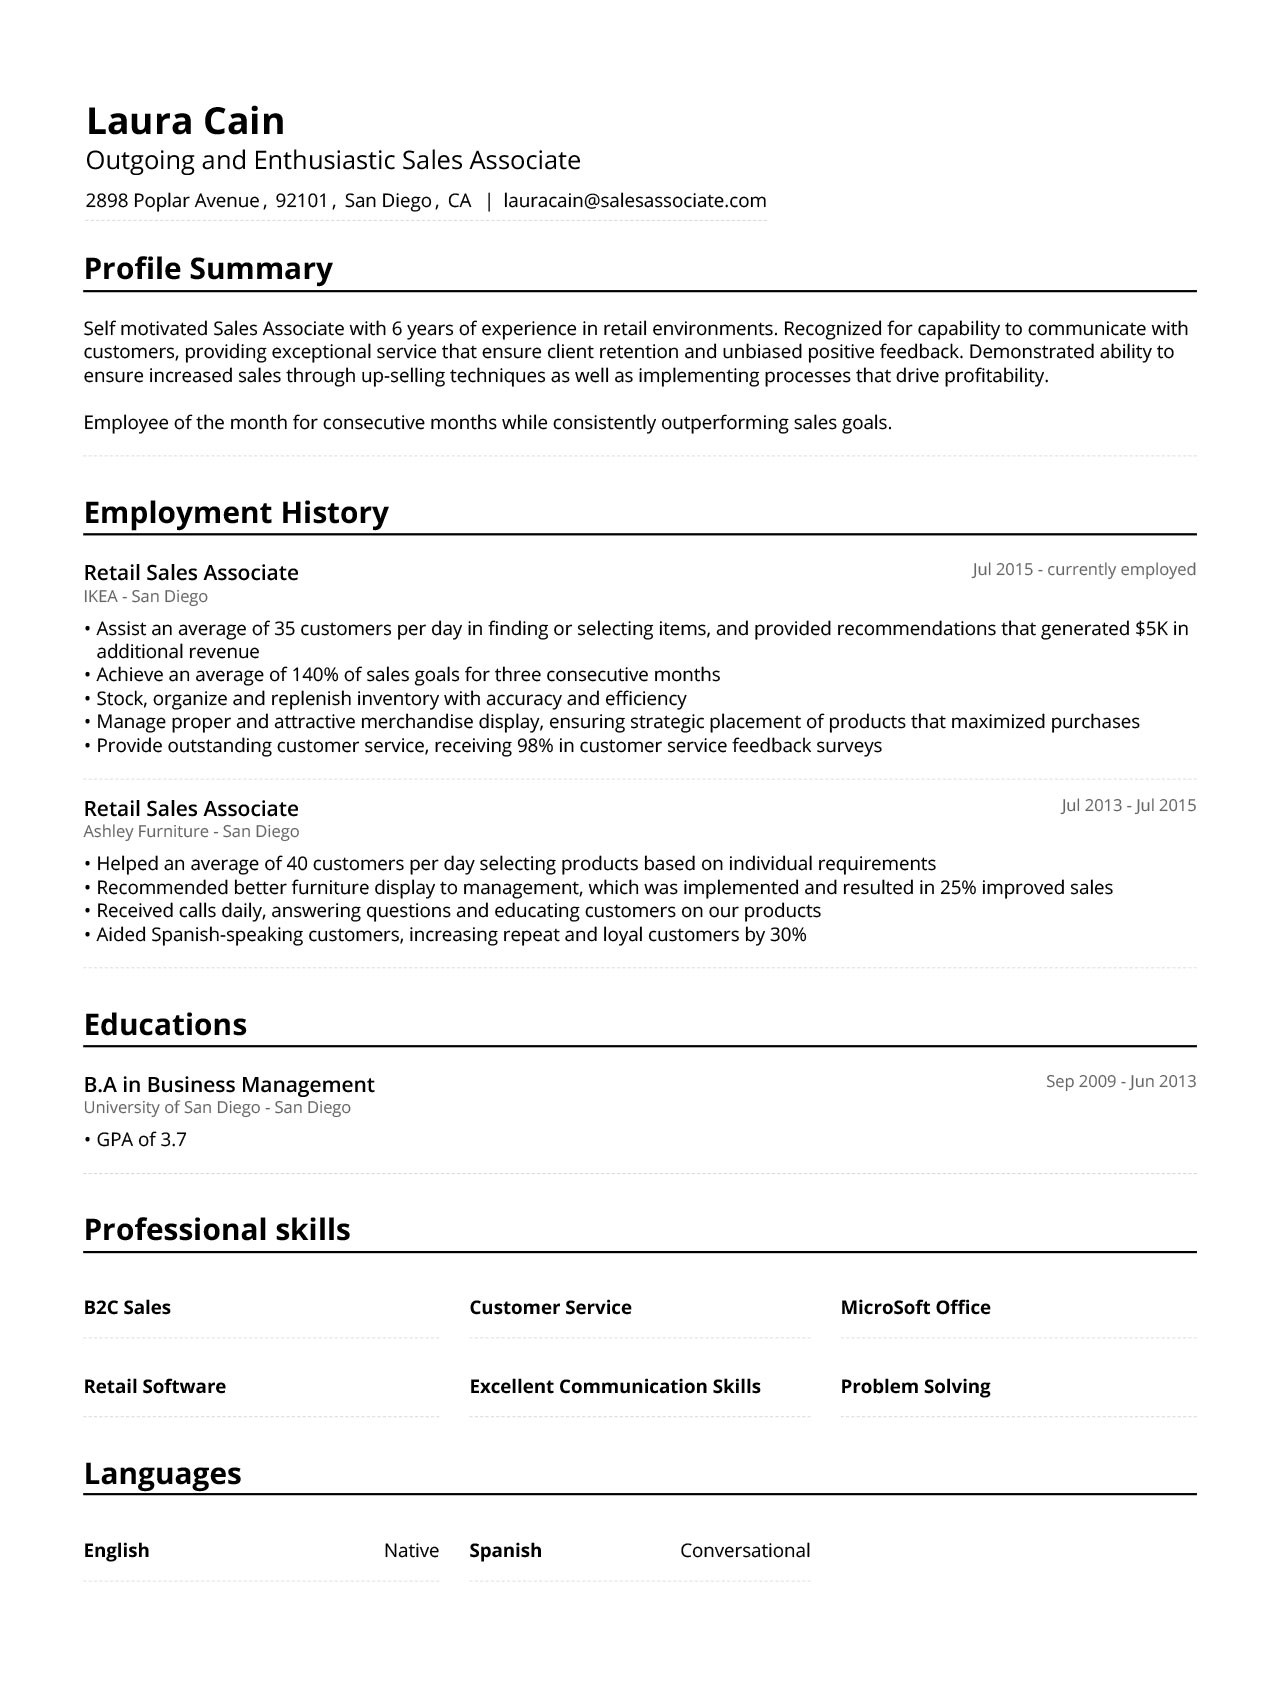 Employee Of the Month Resume Sample Sales associate Resume Example & Writing Guide [2021] – Jofibo